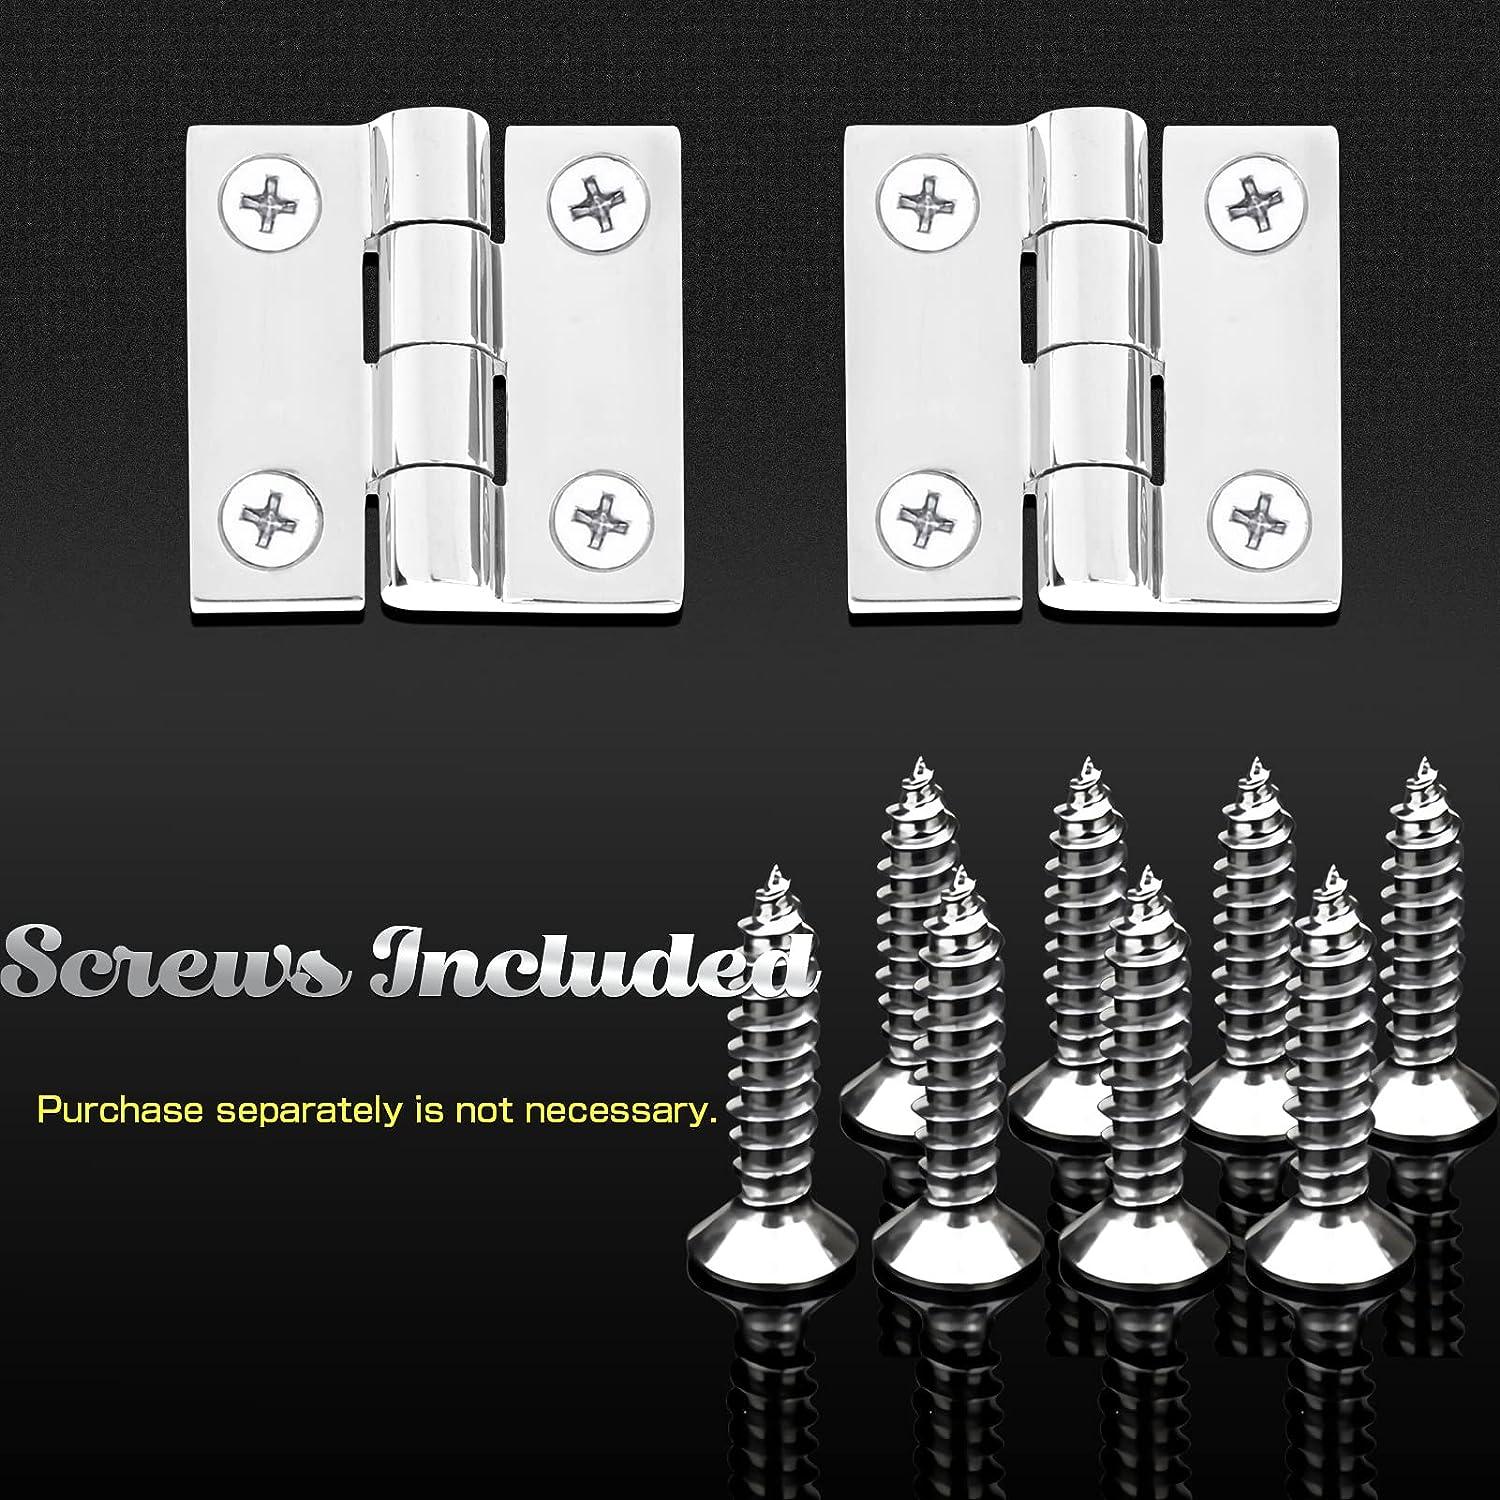 2PCS Stainless Steel 316 Strap Hinge With 6 Holes 152mm Mirror Polish  Marine Boat Hardware Cast Door Strap Hinges